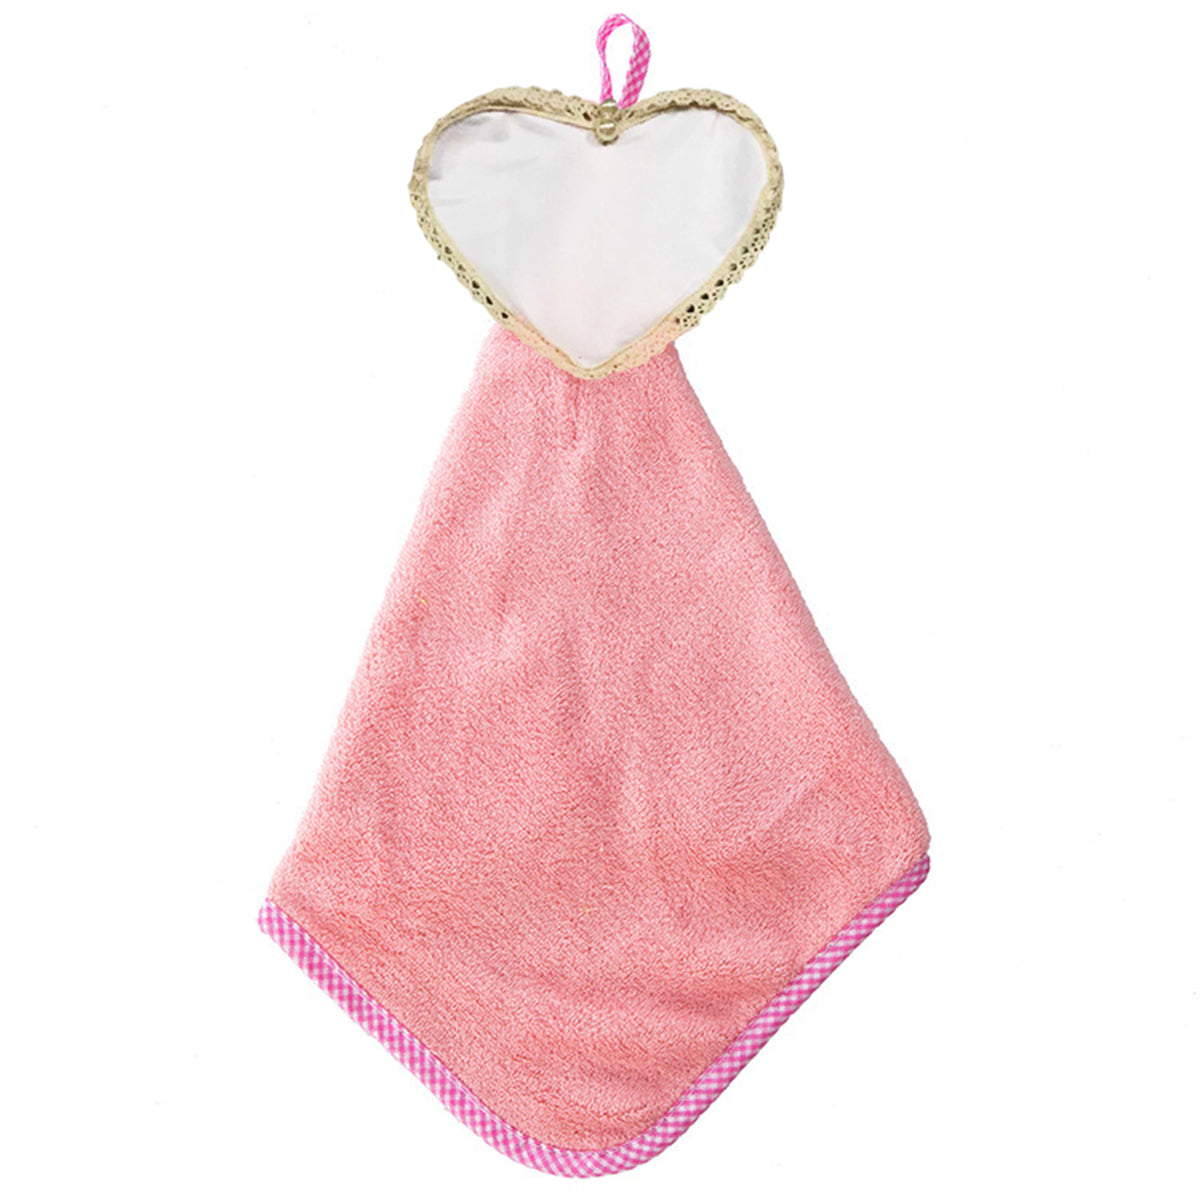 TW2 Personalised Hand Towel Heart Printing For Kid Microfiber Hand Dry Towel Home Decor (Pink)